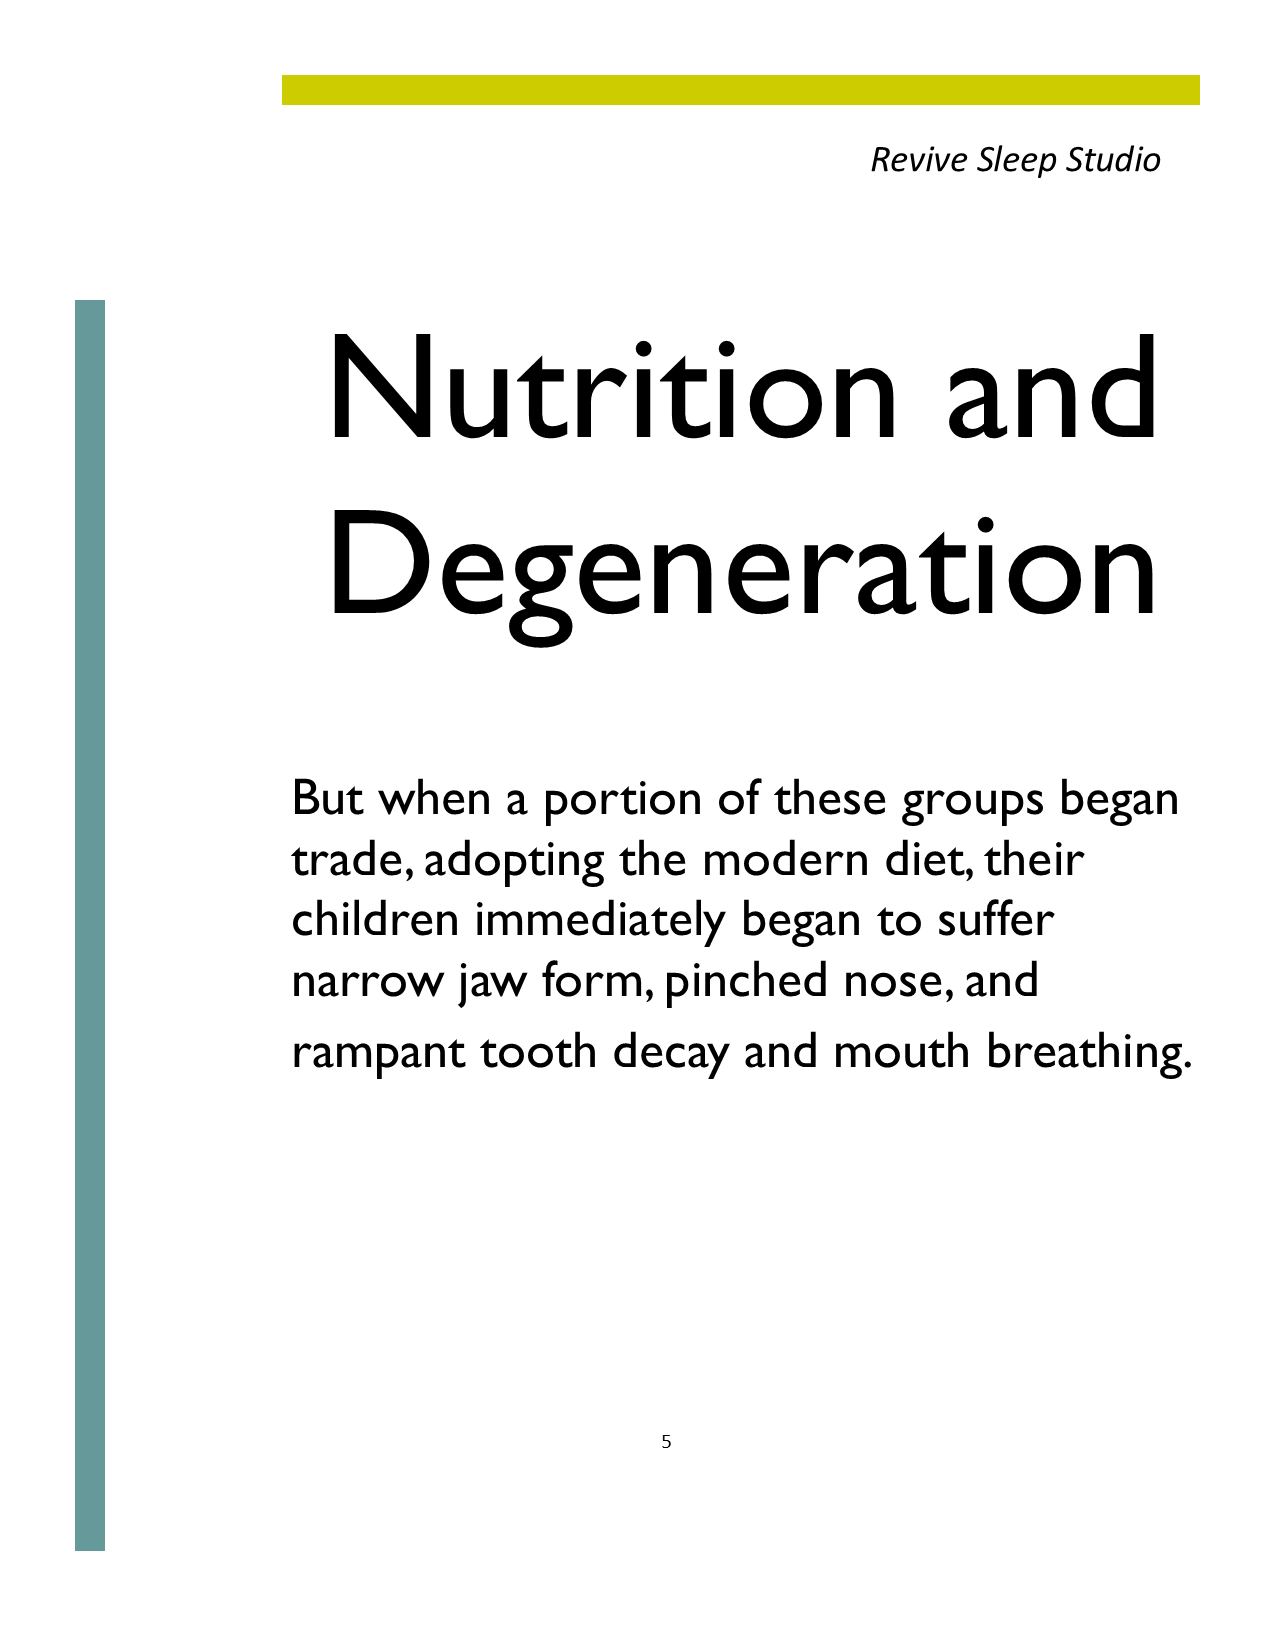 Nutrition+and+Degeneration+ 5